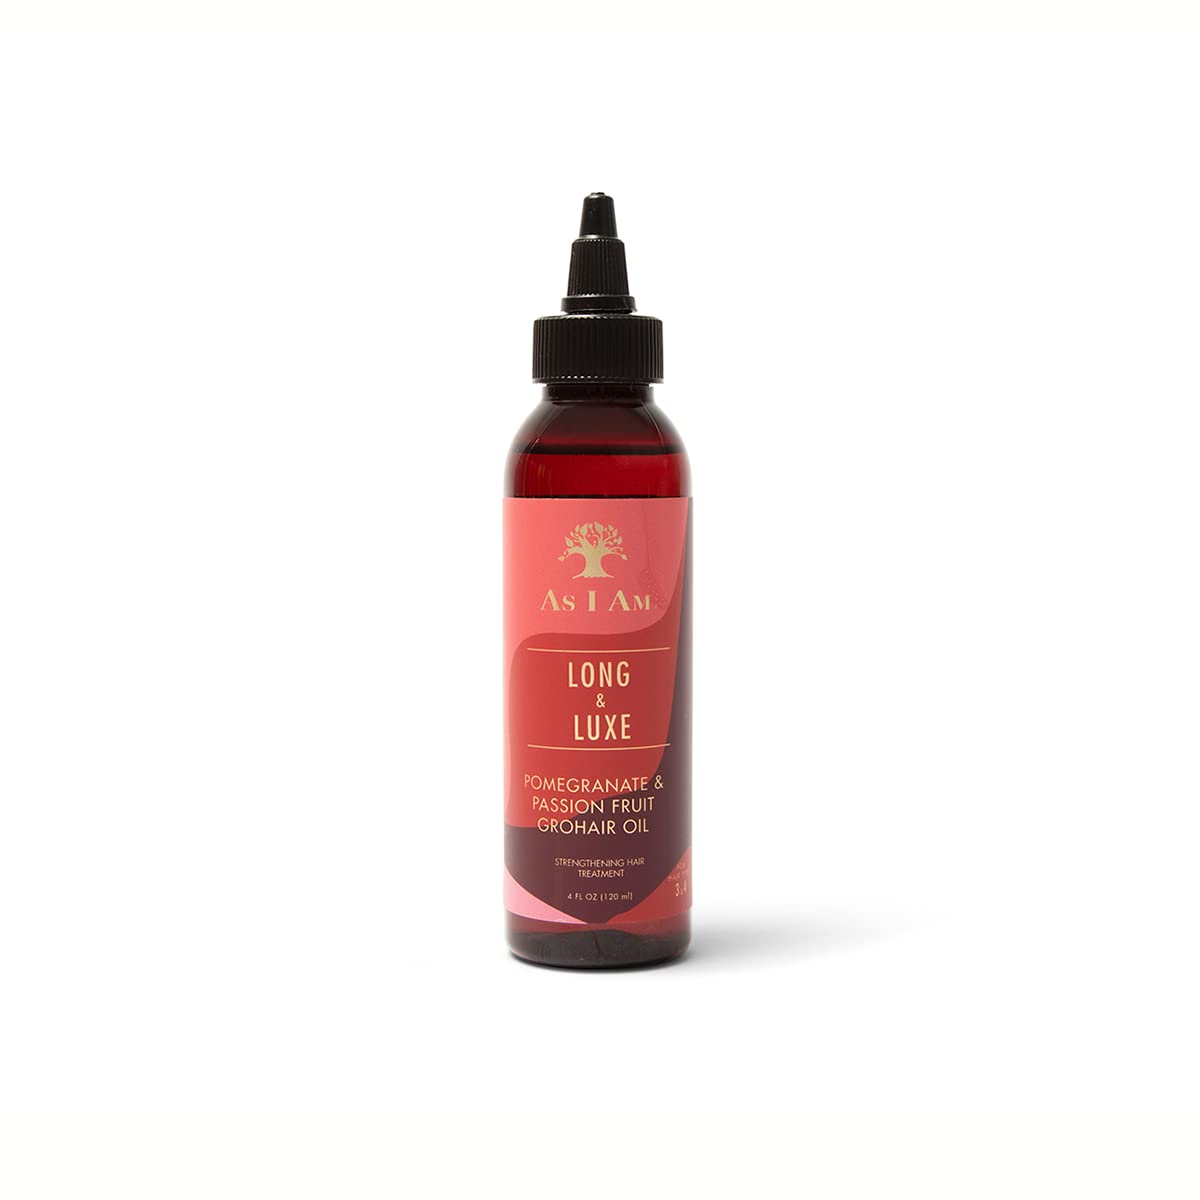 As I Am Long & Luxe Pomegranate & Passion Fruit GroHair Oil, 4oz